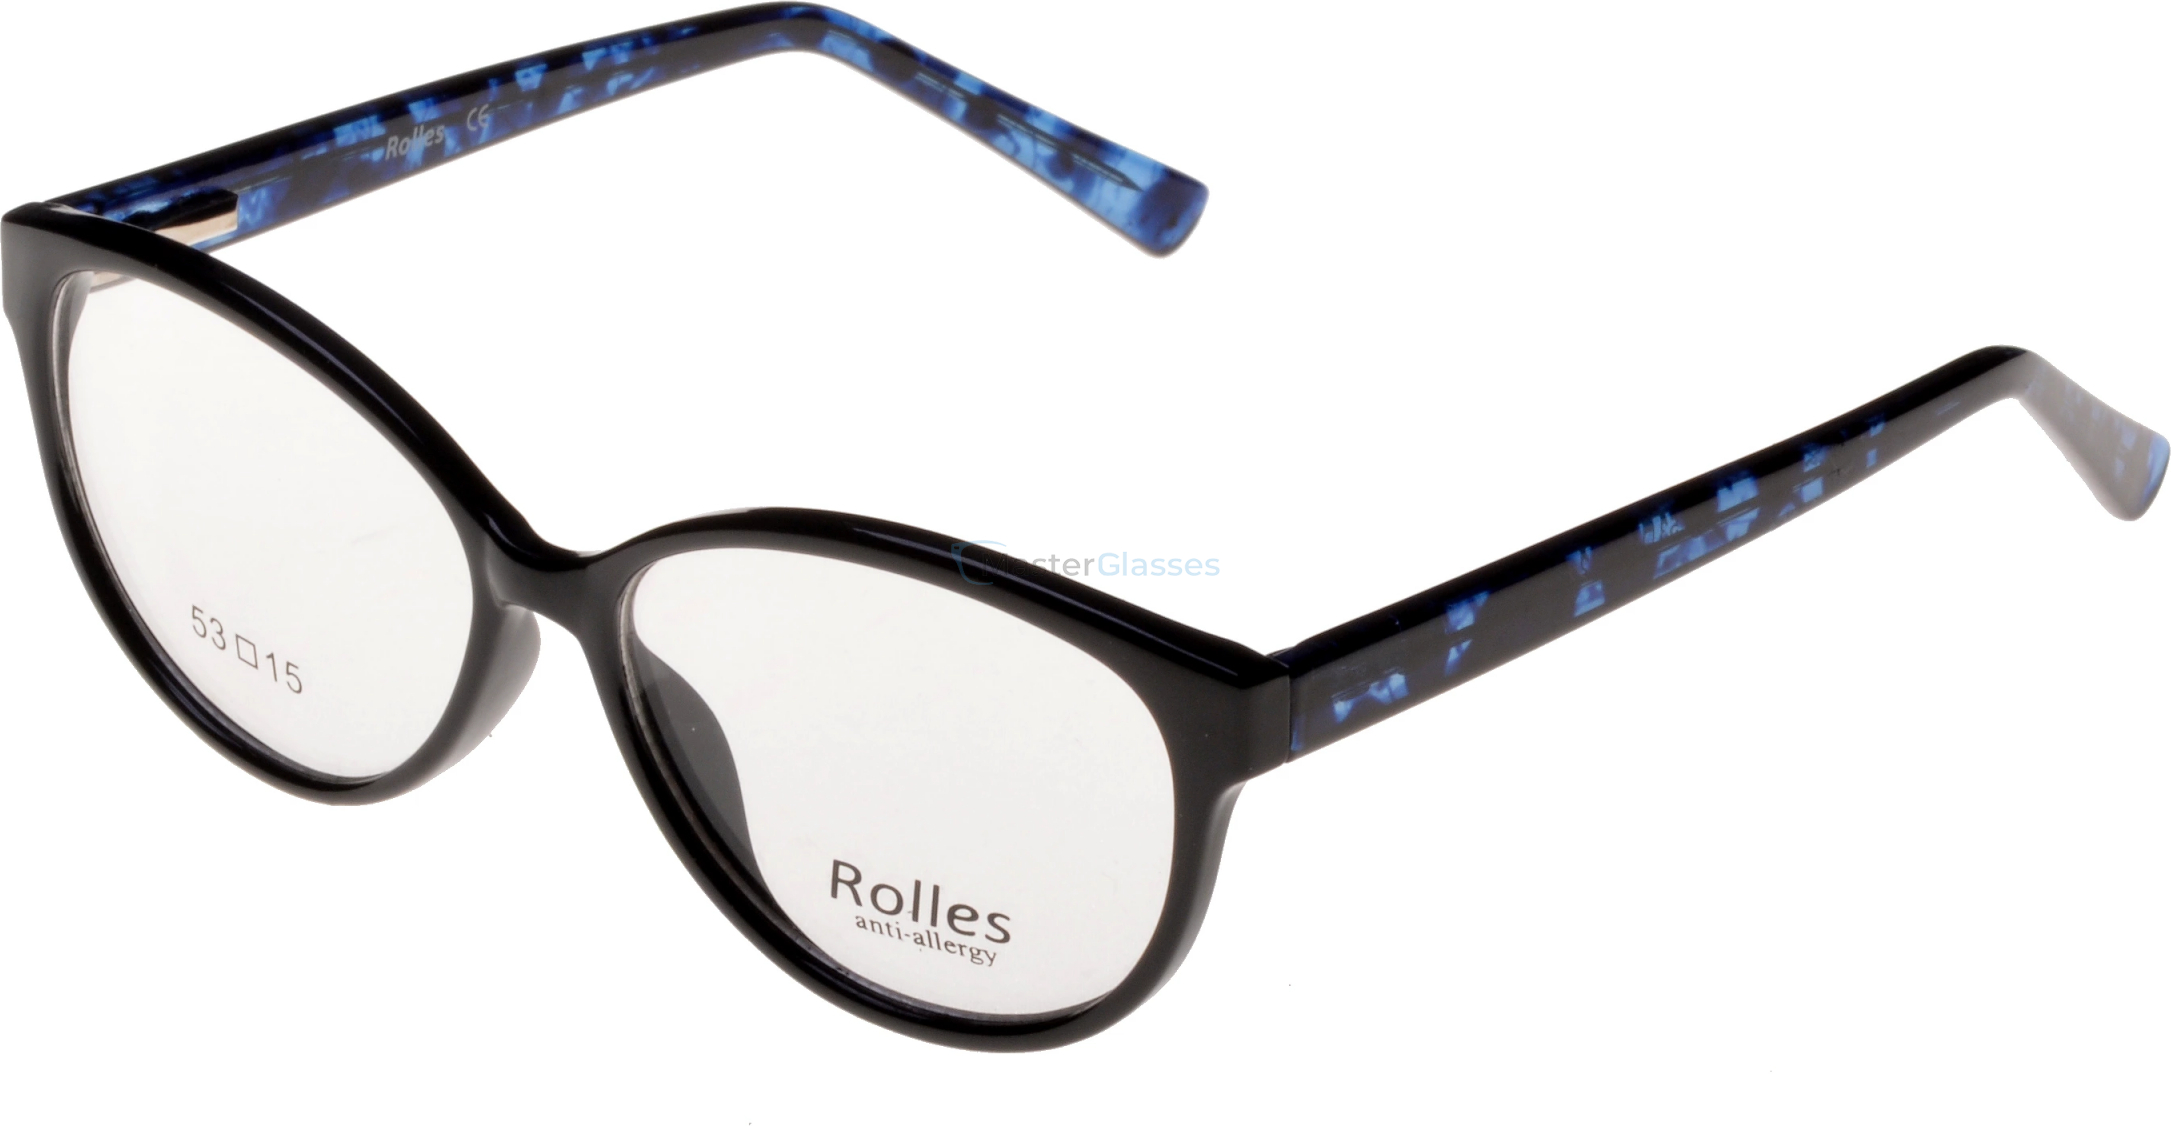  Rolles 534 03